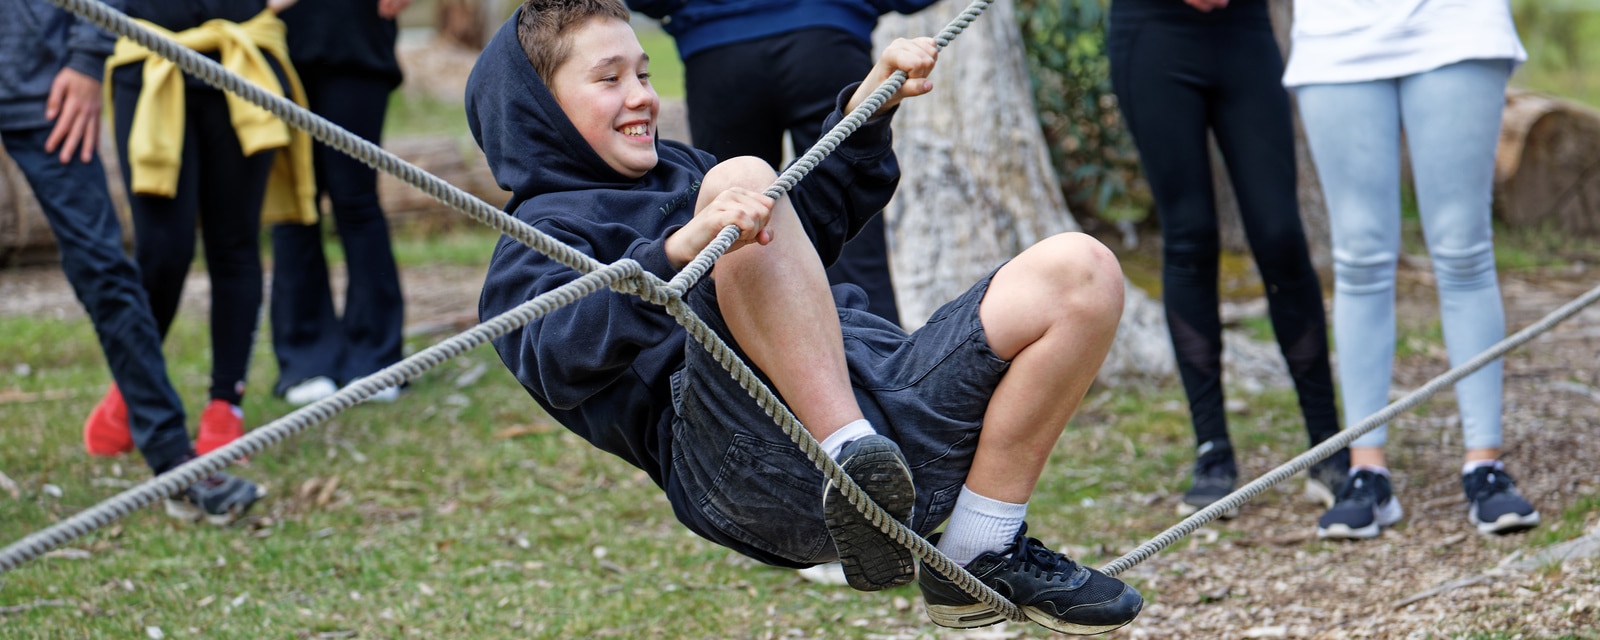 A boy smiles while swinging on a rope at a park, with other children and adults standing in the background.